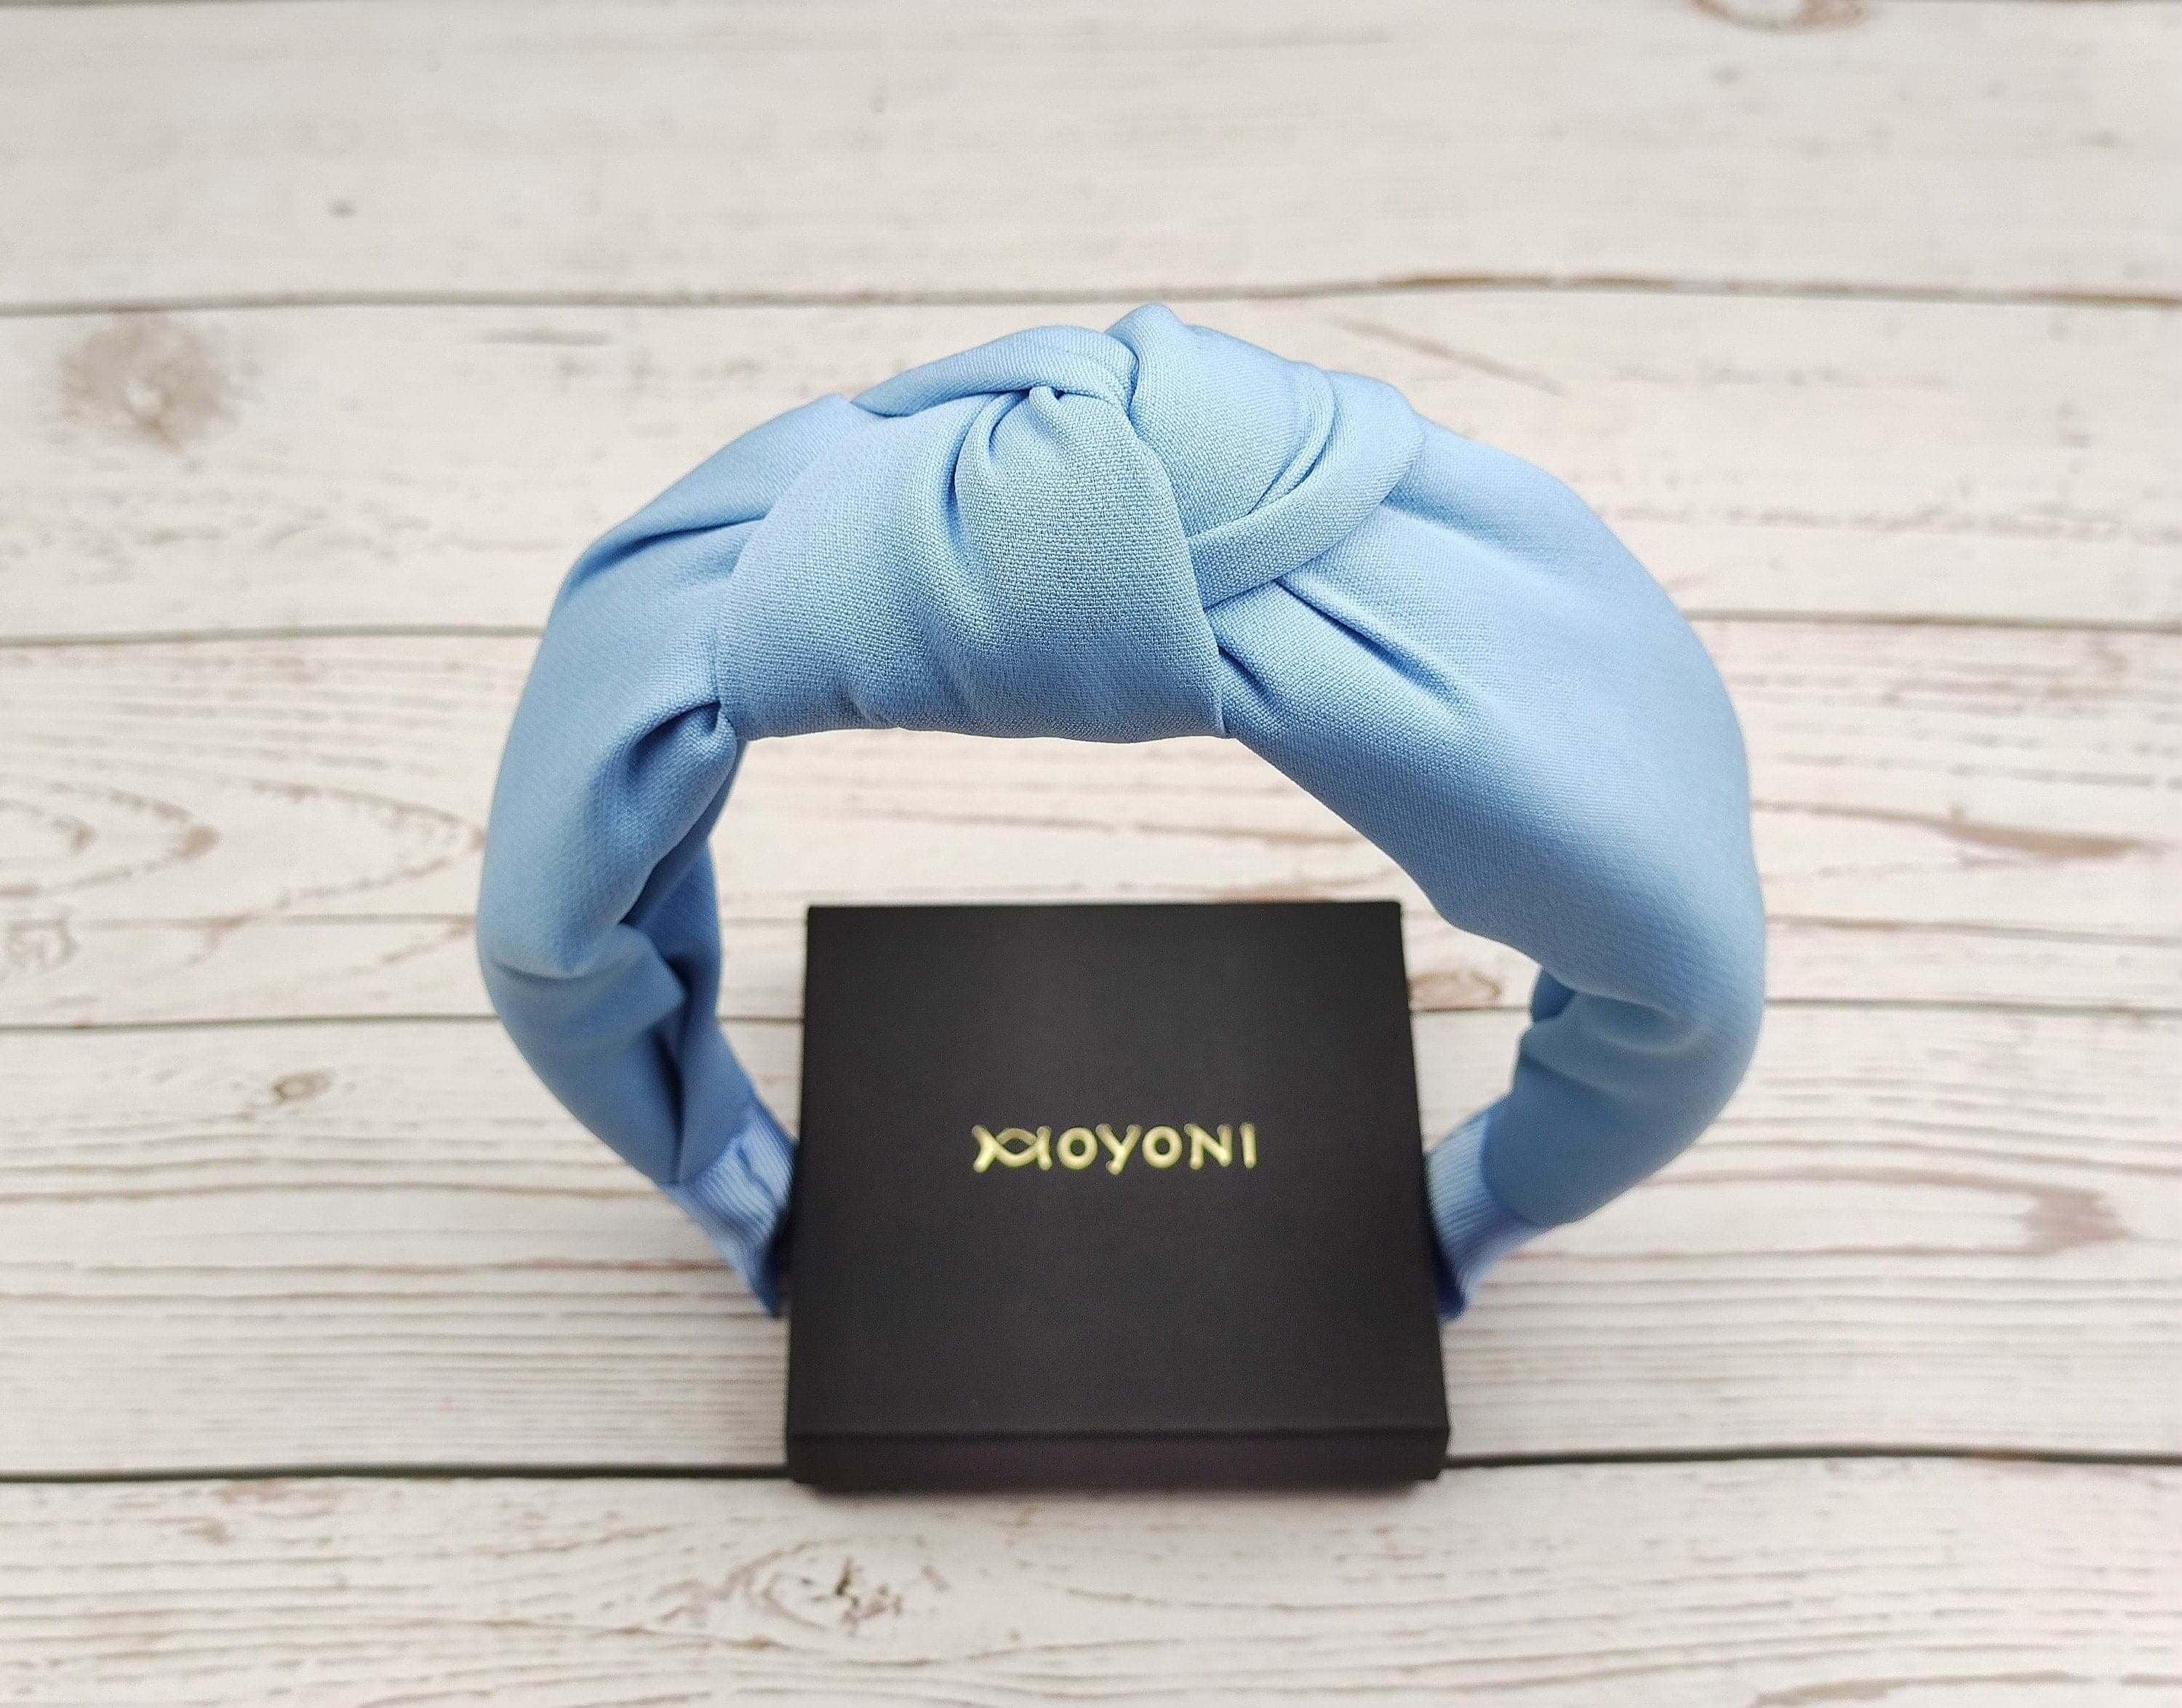 Handcrafted Light Blue Twist Knot Headband - Classic Women's Hairband in Bright Fashionable Color - Viscose Crepe Padded for Comfort available at Moyoni Design